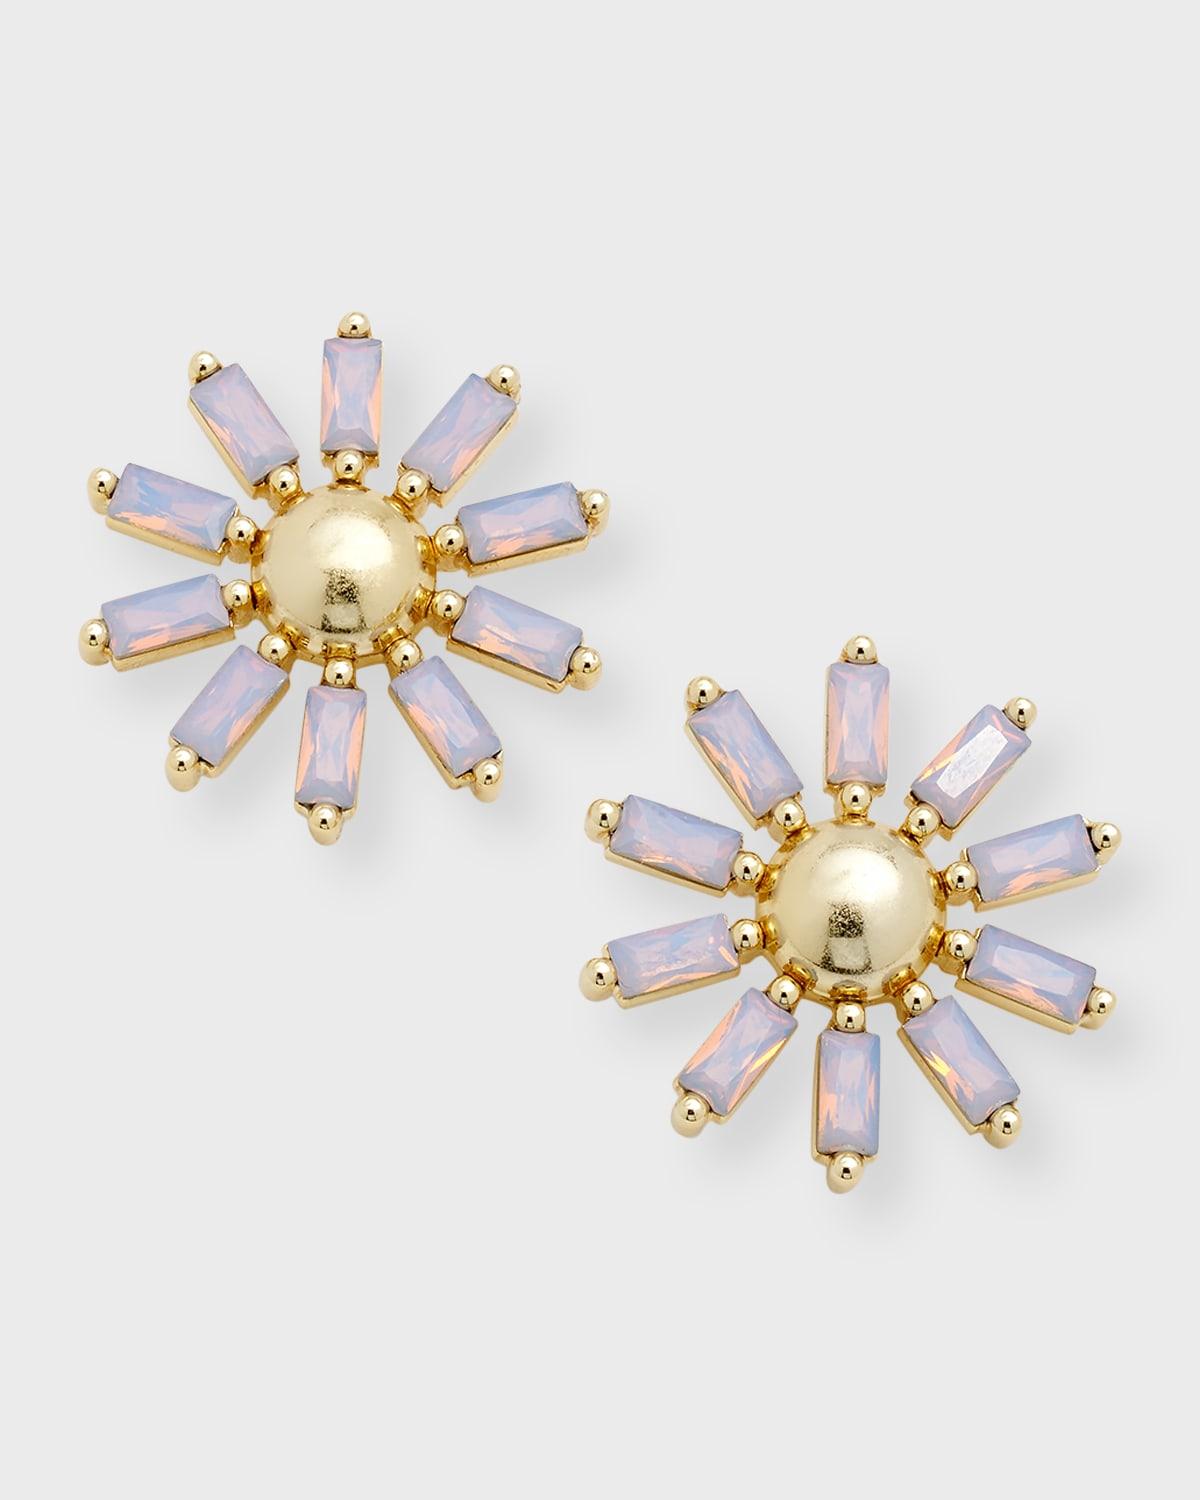 Color Blossom Earrings, Pink Gold, White Gold, Pink Opal And